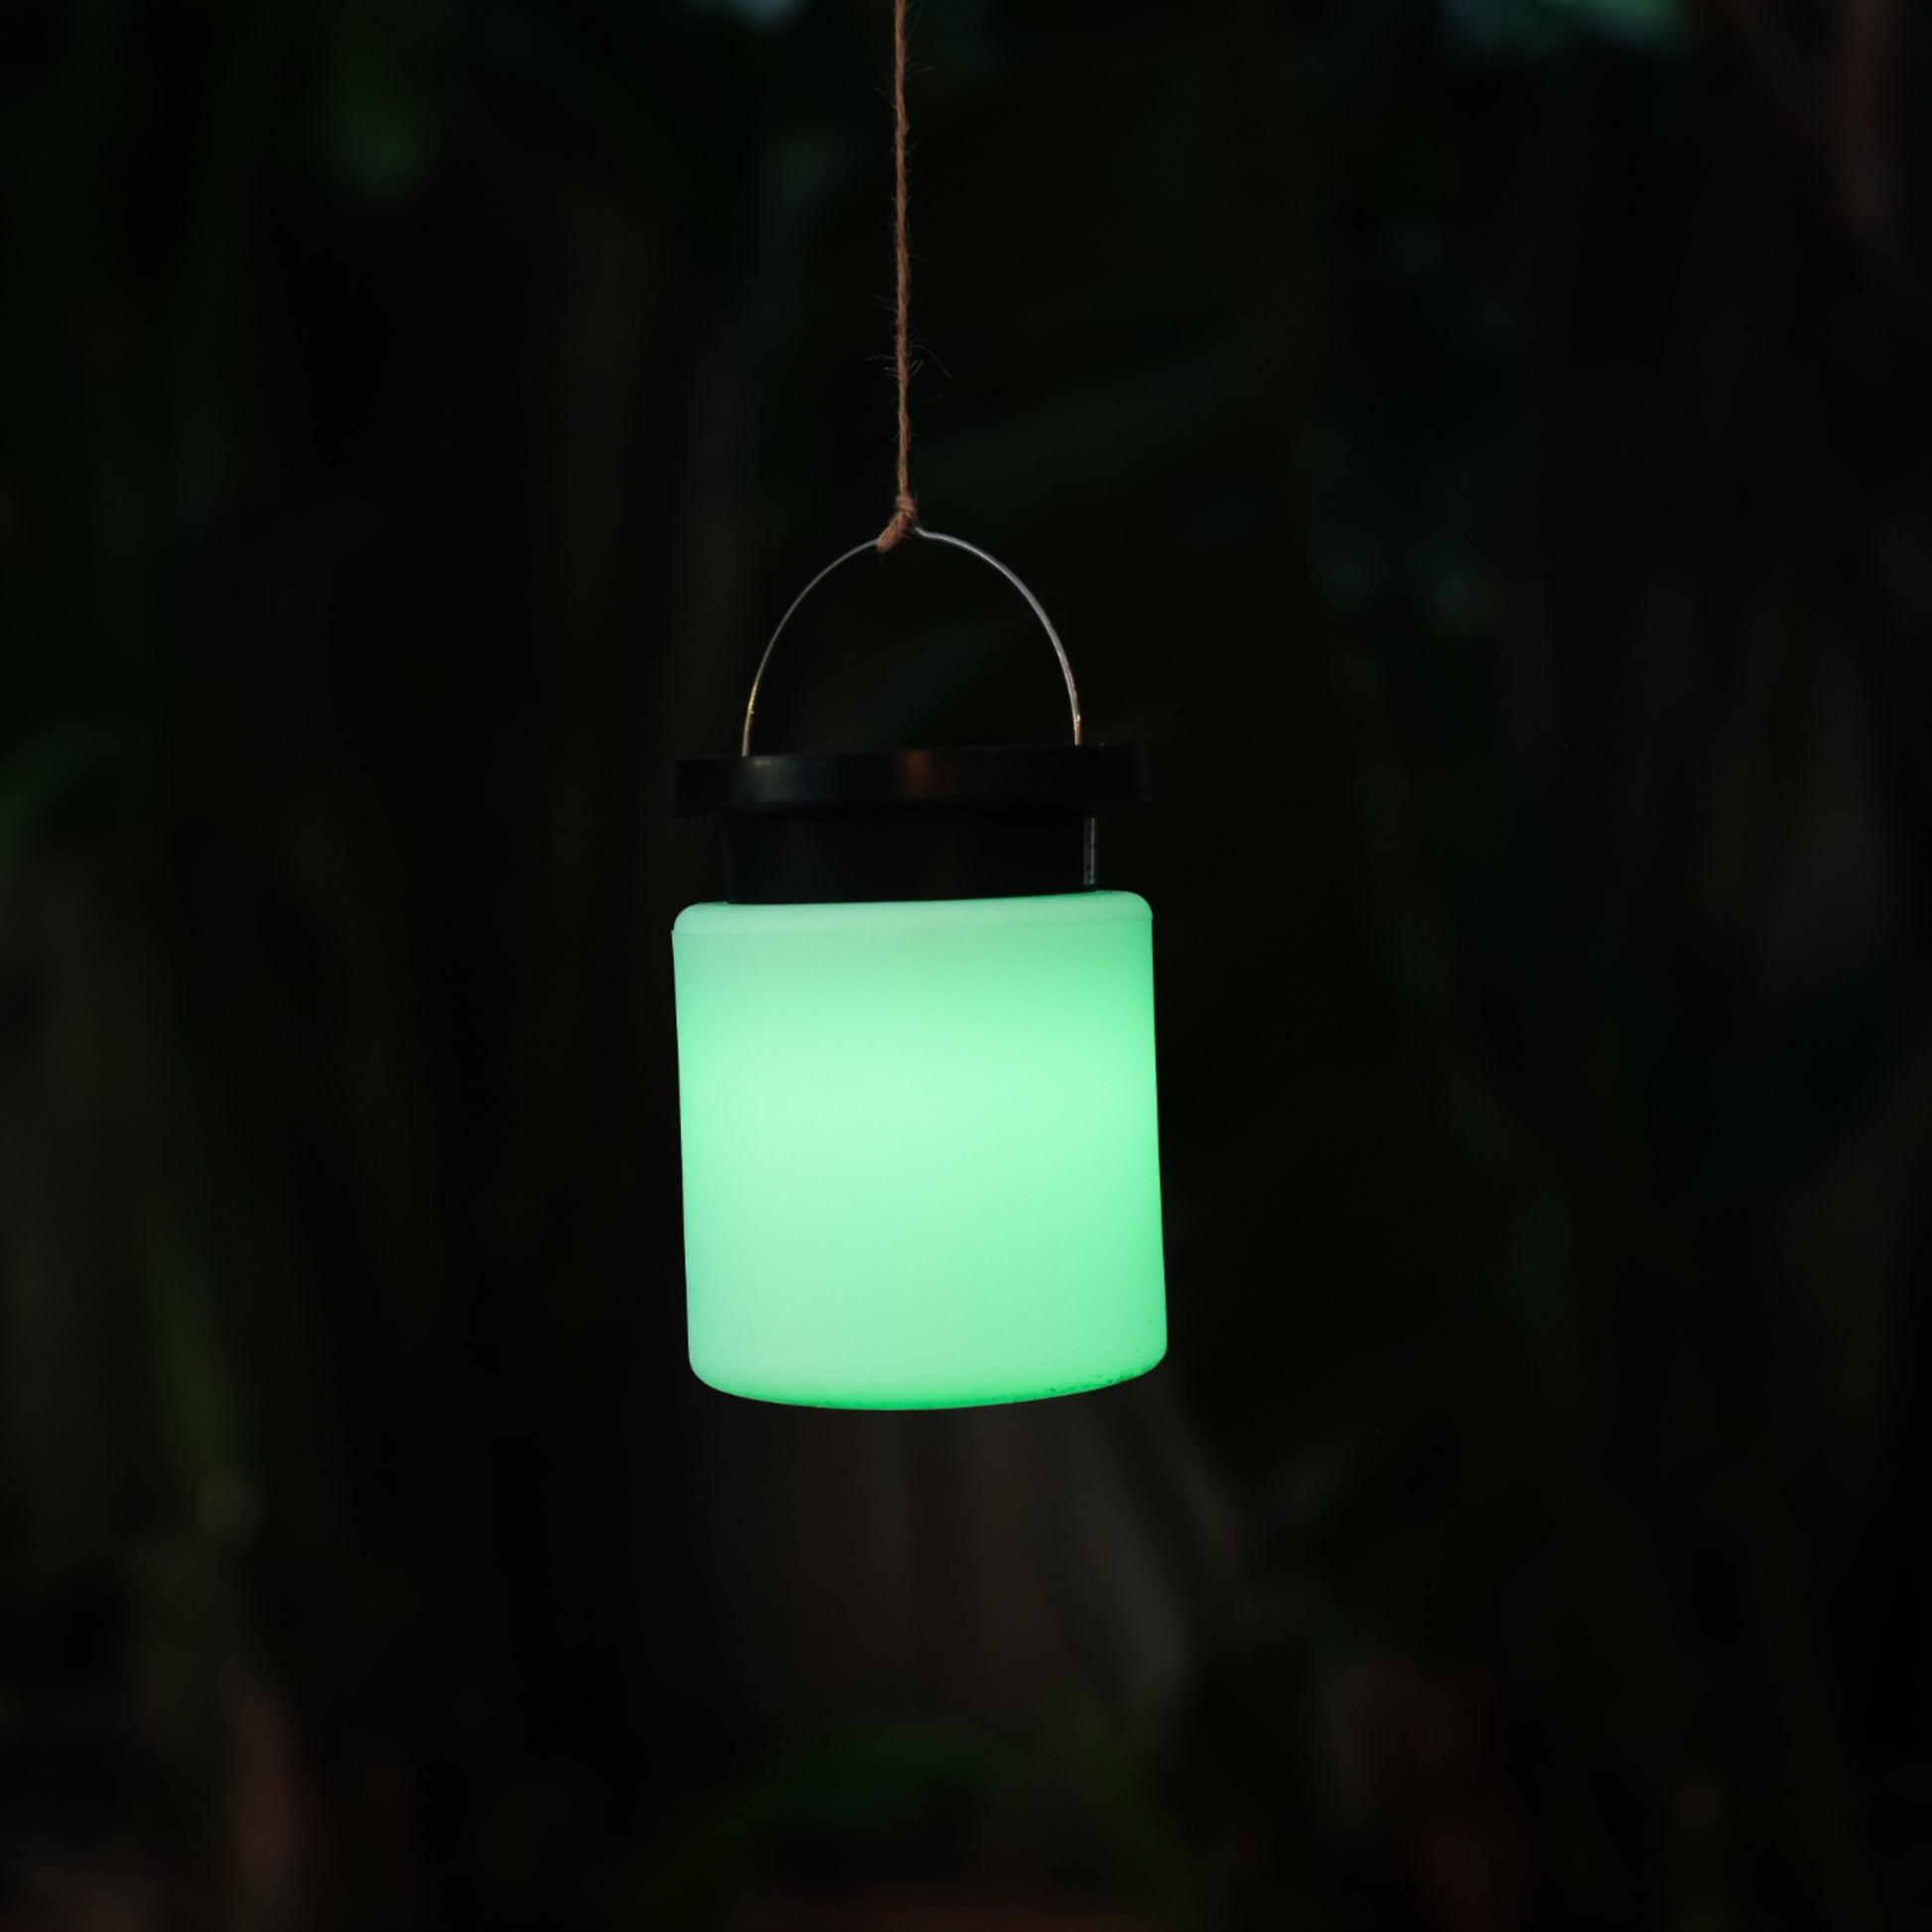 Solar camp light hanging from a string and shining green